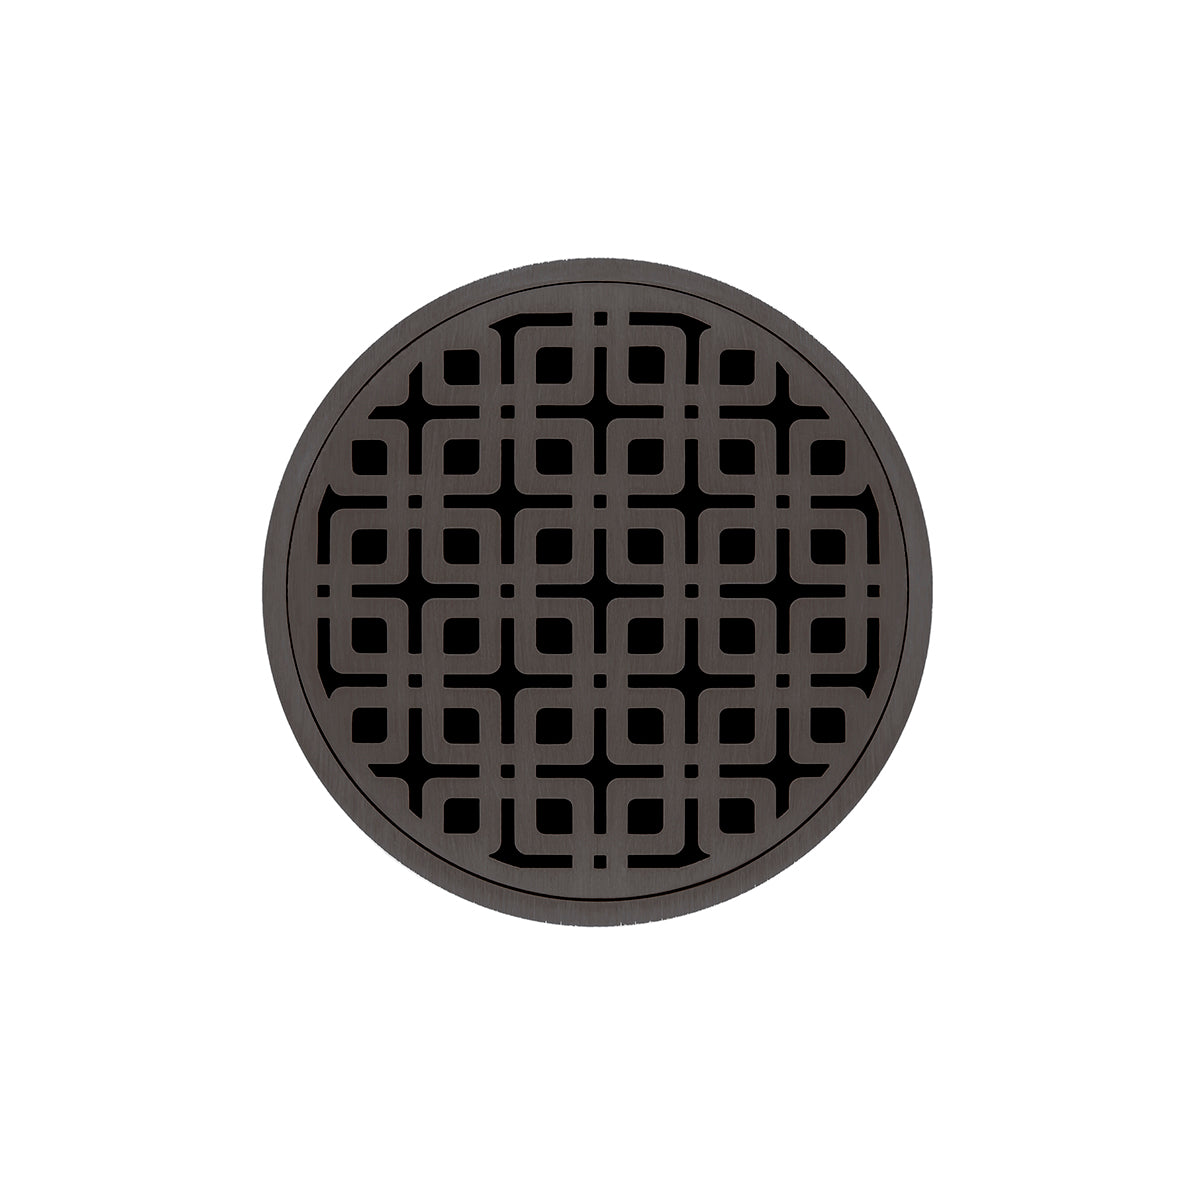 Infinity Drain 5" Round RKD 5 High Flow Premium Center Drain Kit with Link Pattern Decorative Plate with PVC Drain Body, 3" Outlet